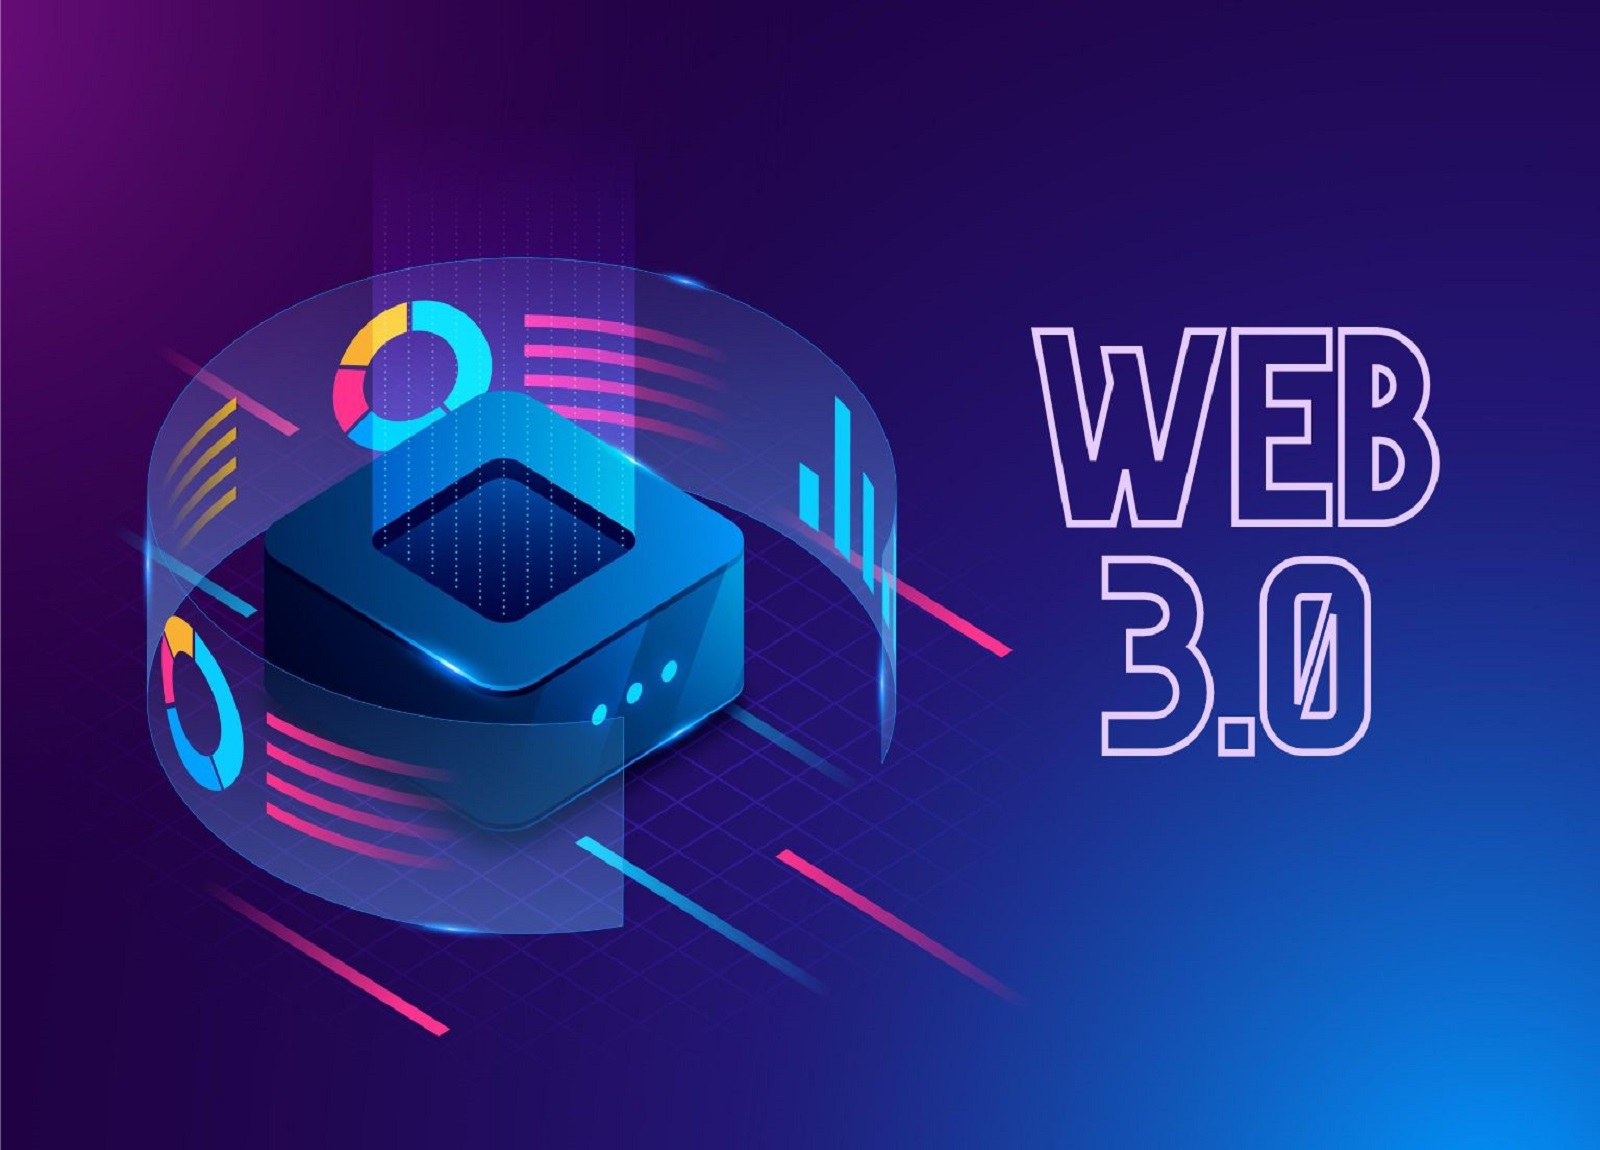 Web 3.0: A New Era of Decentralization and Interconnectivity